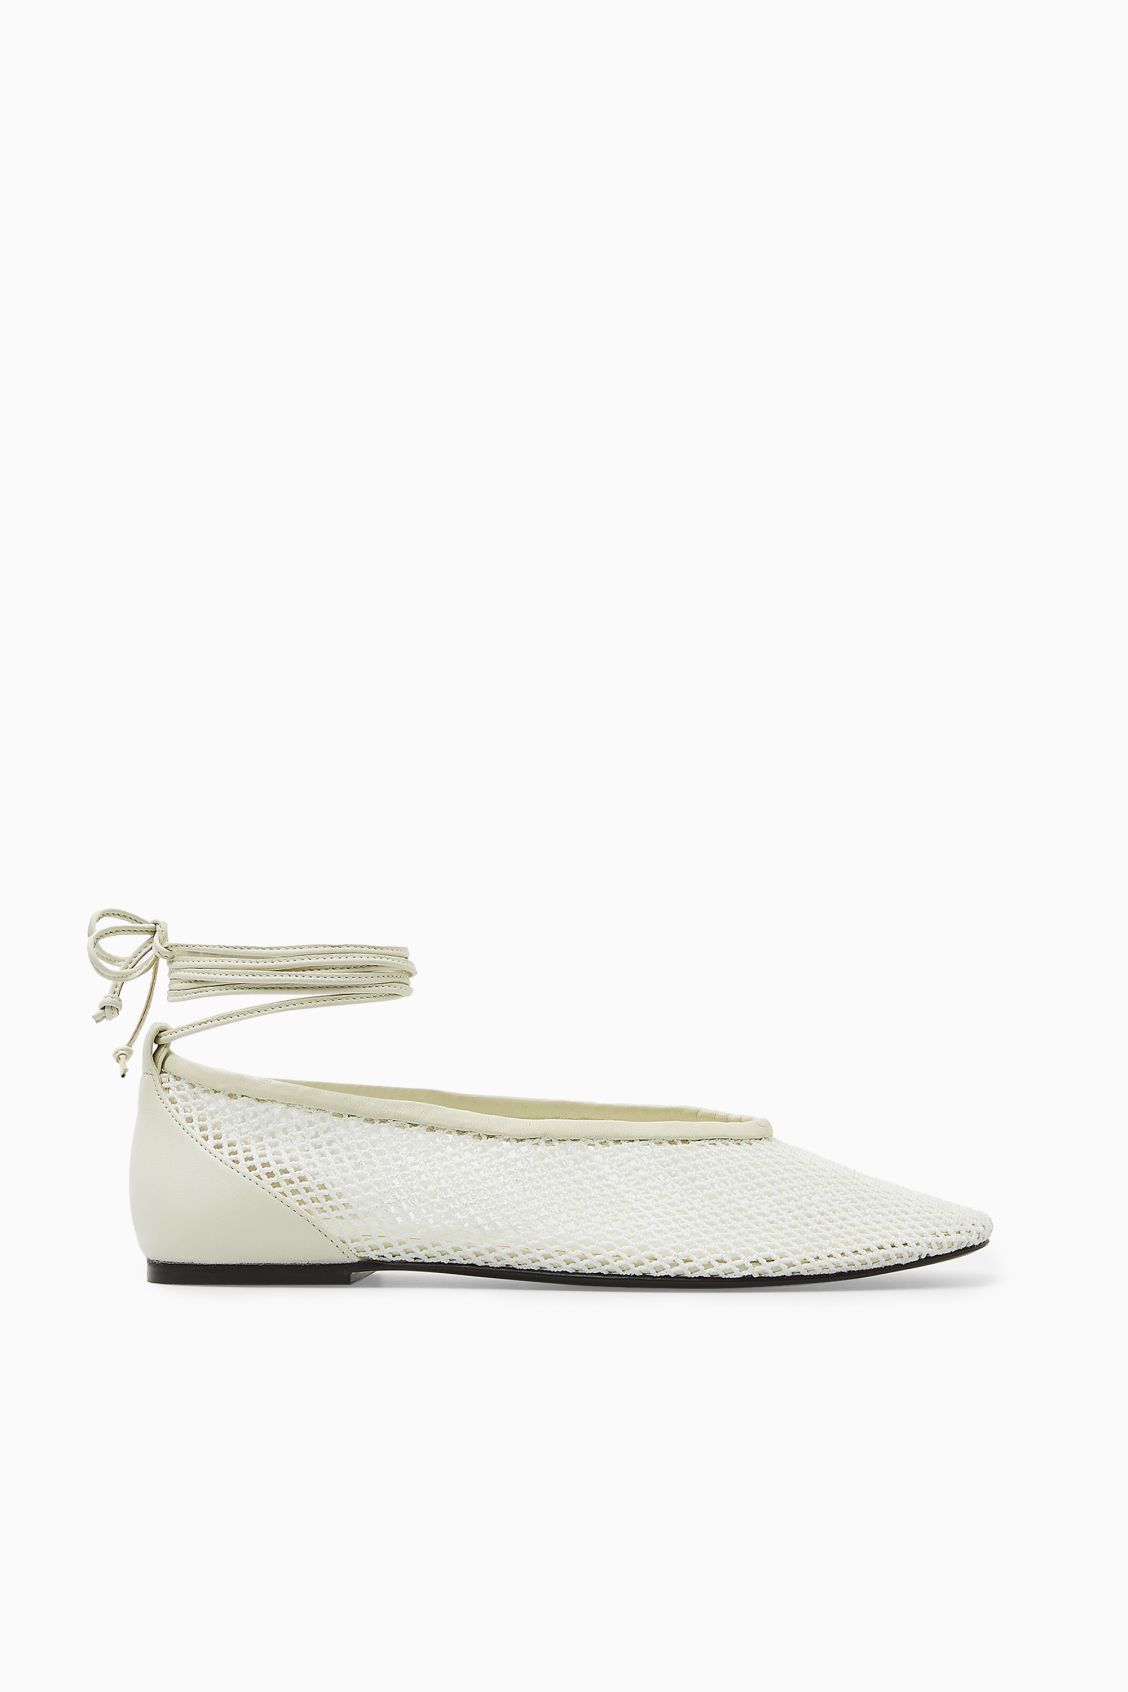 LEATHER-TRIMMED MESH BALLET FLATS - White - Shoes - COS | COS (US)